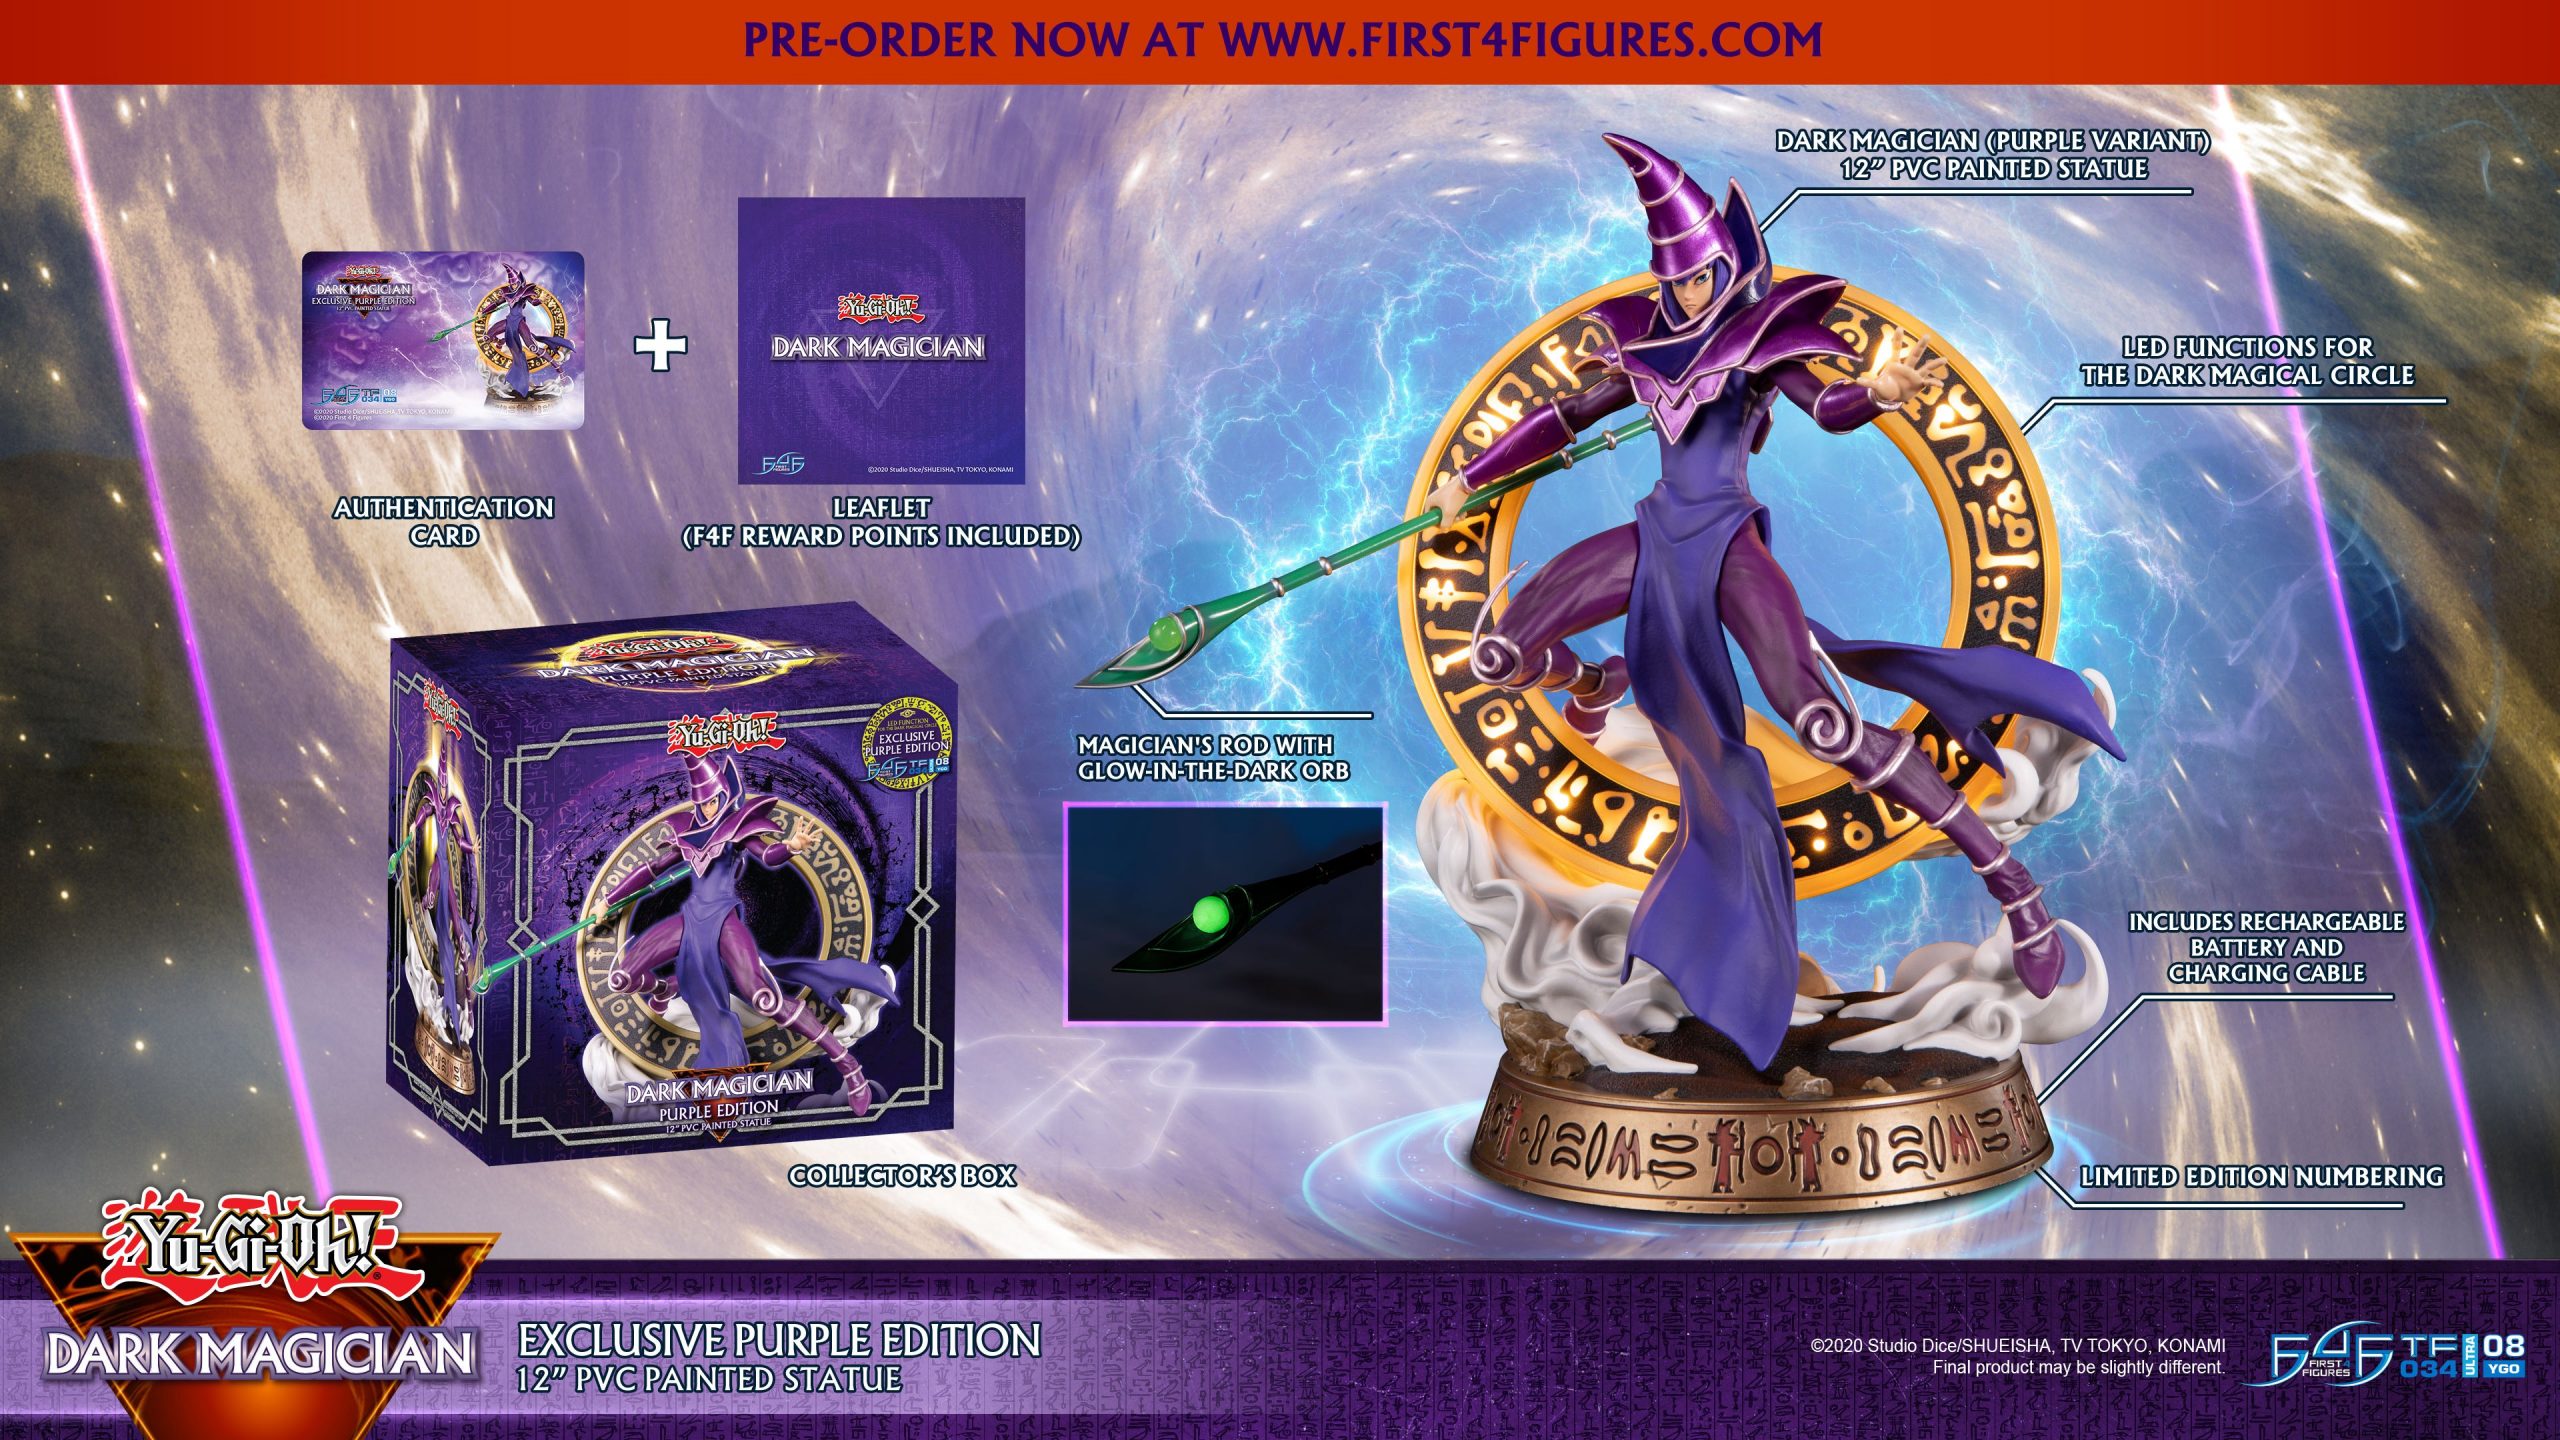 The Organization | Dark Magician from First 4 Figures